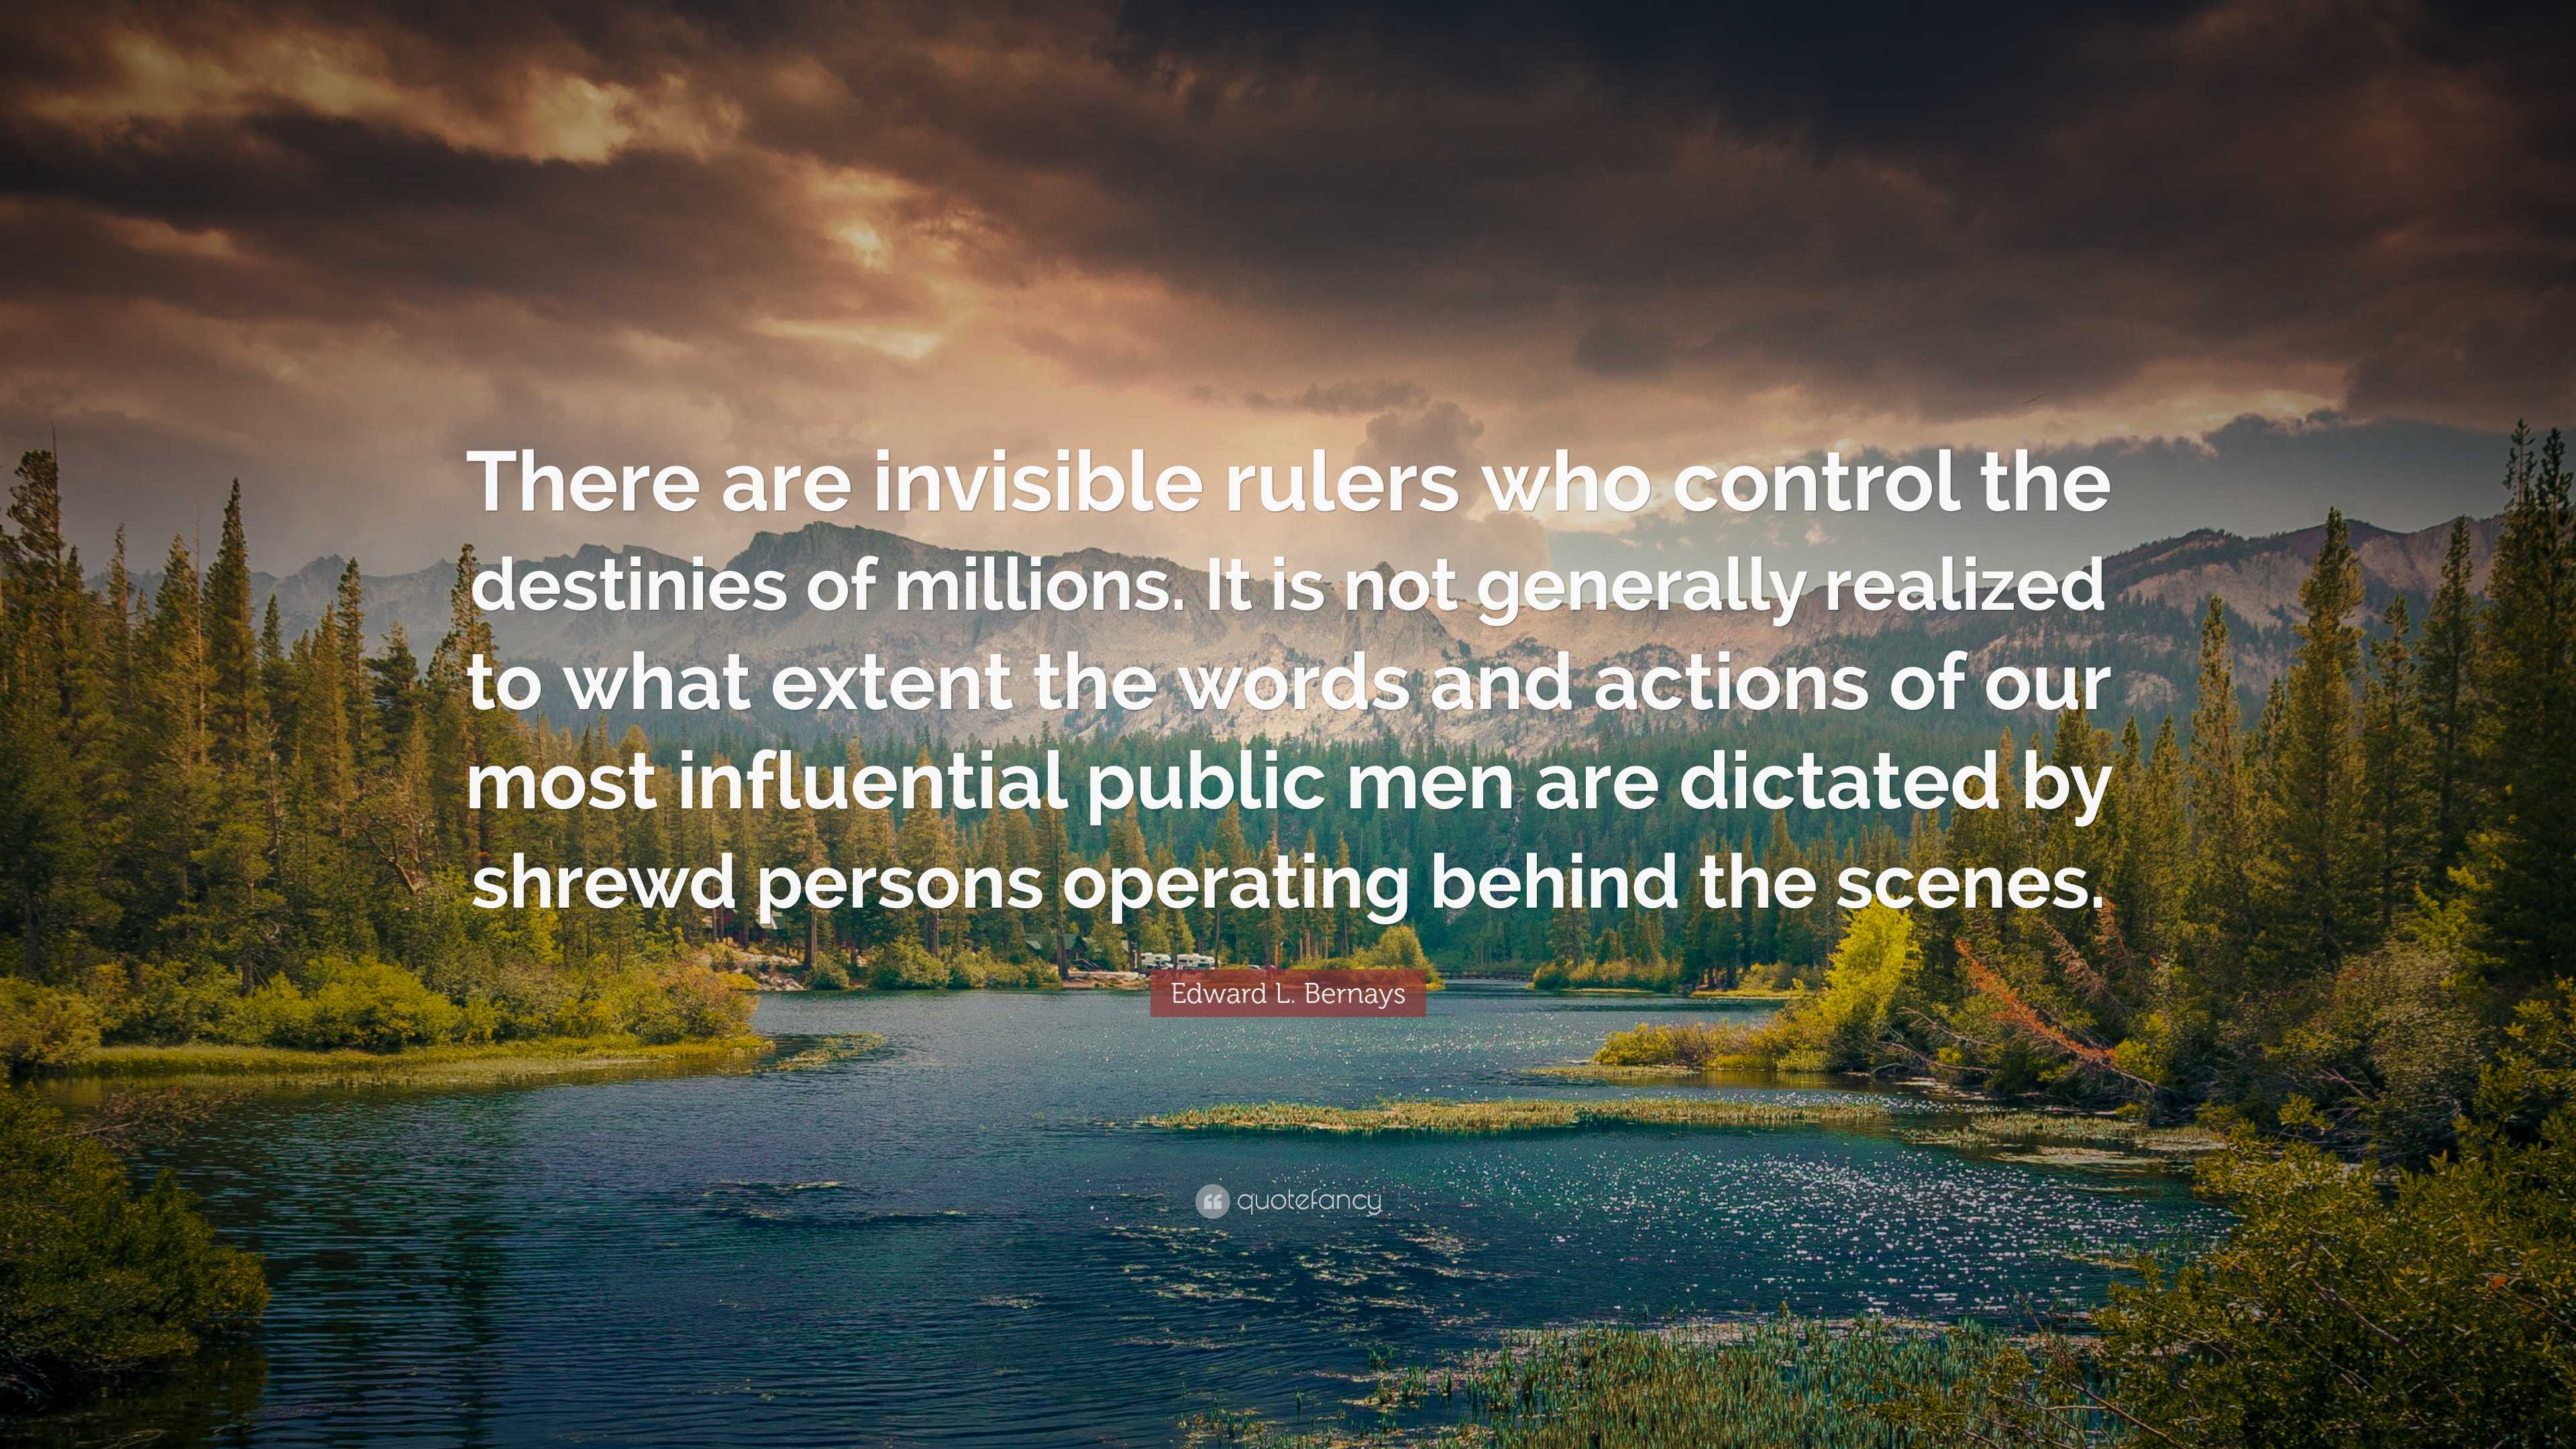 https://quotefancy.com/media/wallpaper/3840x2160/7864109-Edward-L-Bernays-Quote-There-are-invisible-rulers-who-control-the.jpg